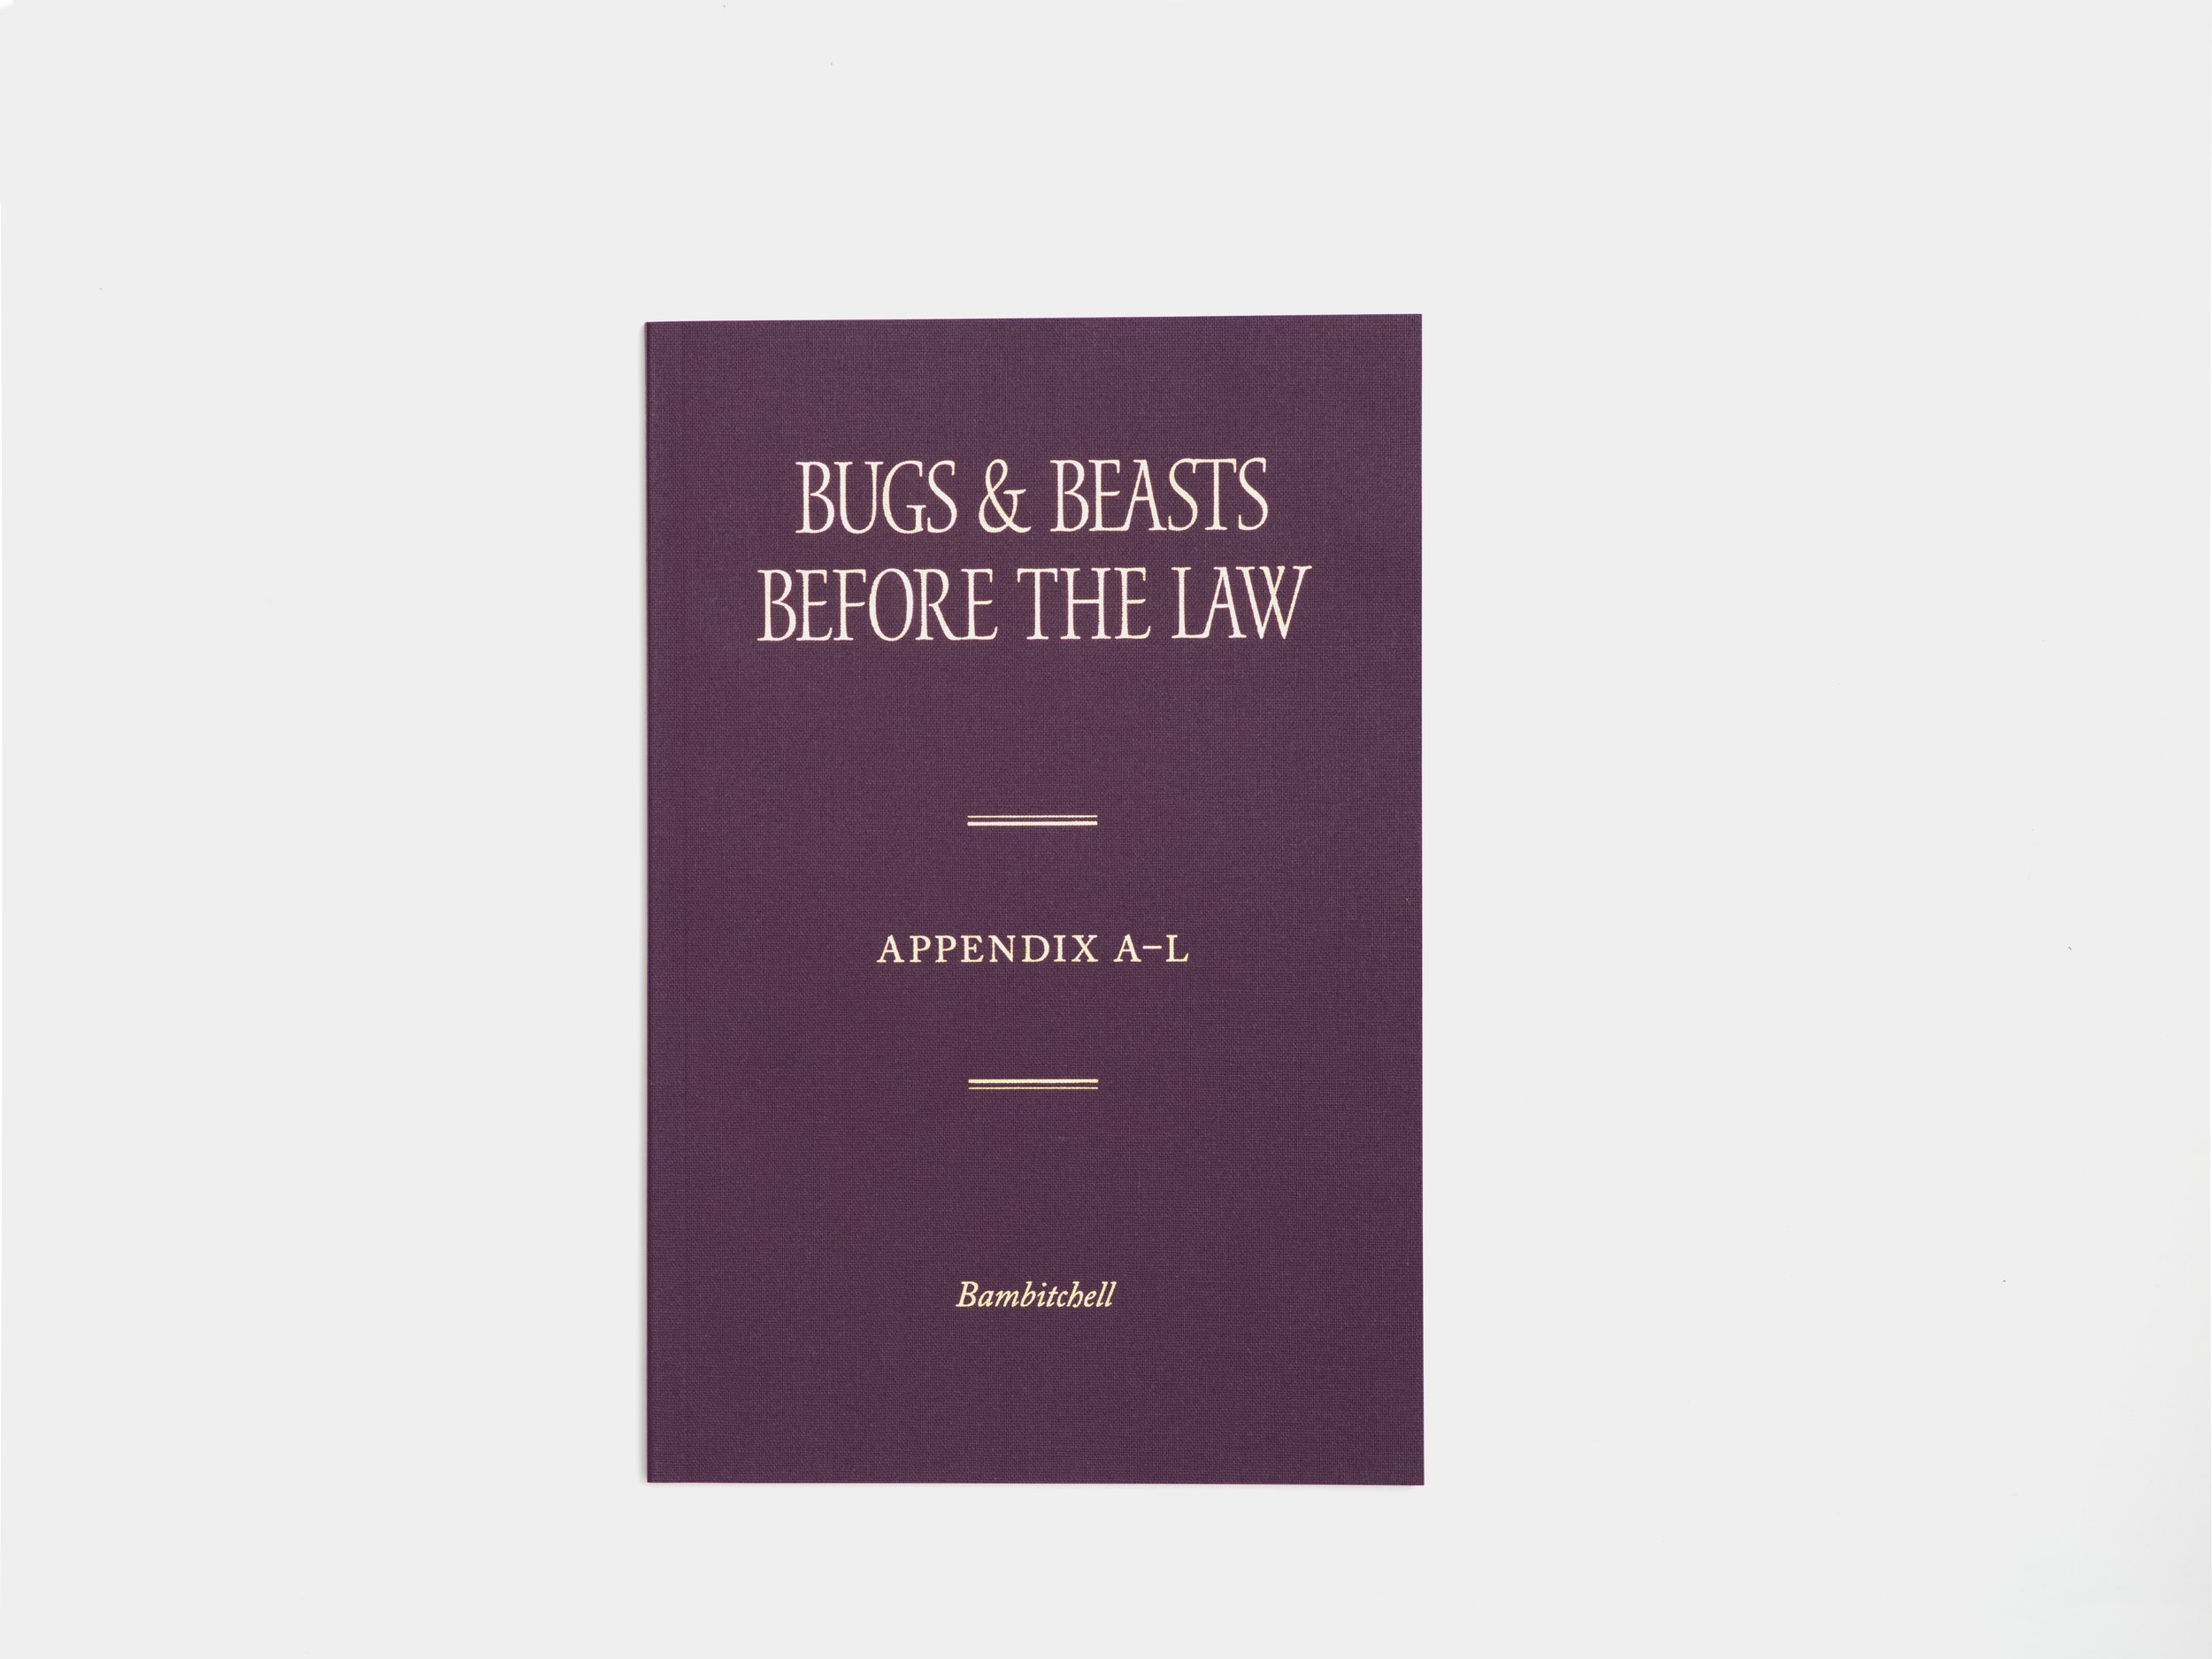   Bugs &amp; Beasts Before the Law, Appendix A-L  is a complementary publication to the experimental essay film Bugs &amp; Beasts Before the Law (2019) by Bambitchell, the artist collaboration of Sharlene Bamboat and Alexis Kyle Mitchell. It is publi